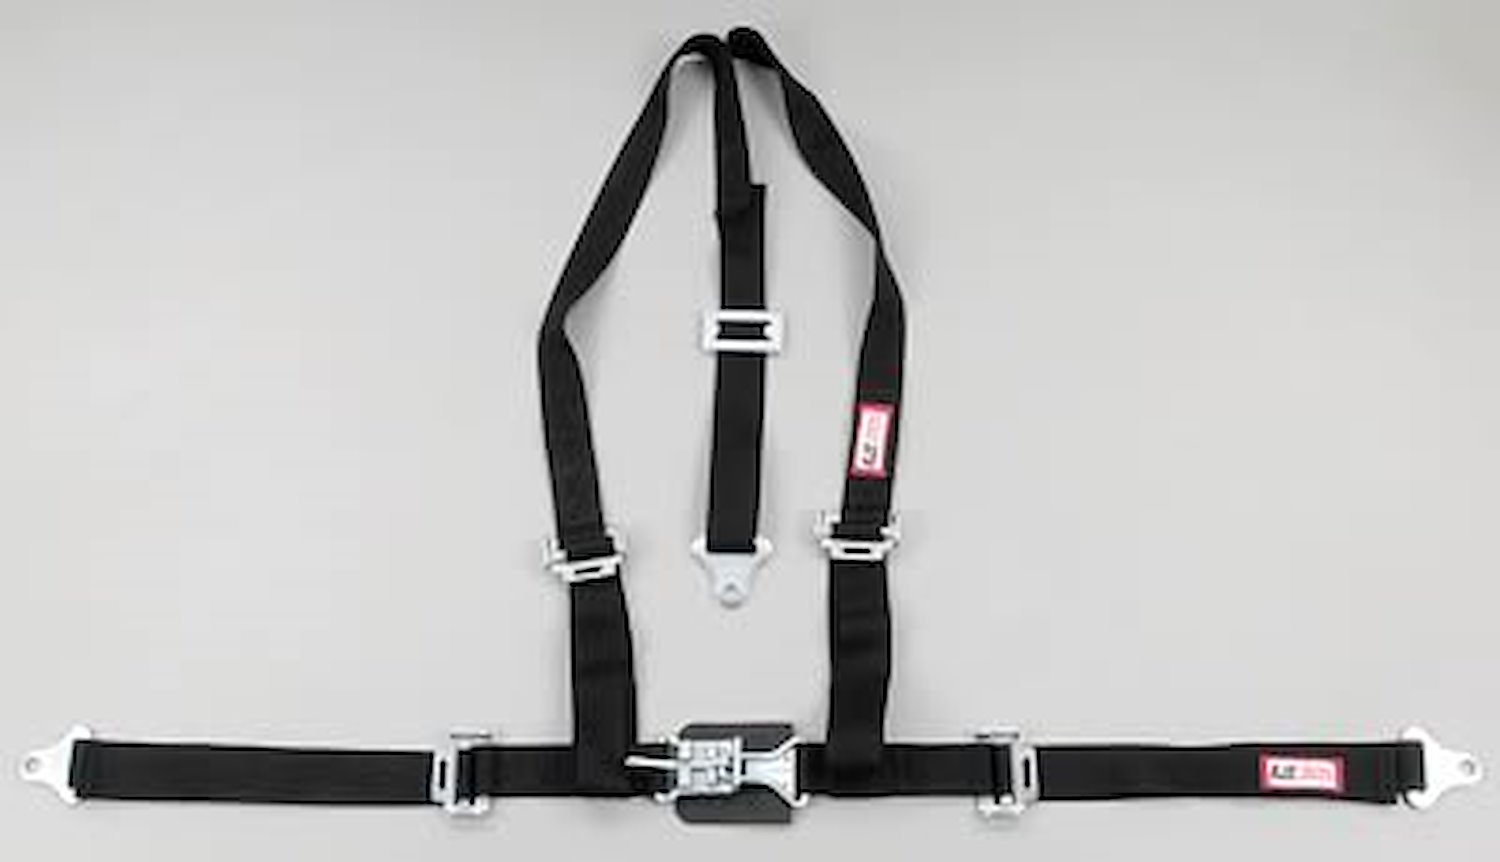 NON-SFI L&L HARNESS 3 PULL UP Lap Belt SEWN IN 2 S.H. Individual FLOOR Mount ALL WRAP ENDS GRAY